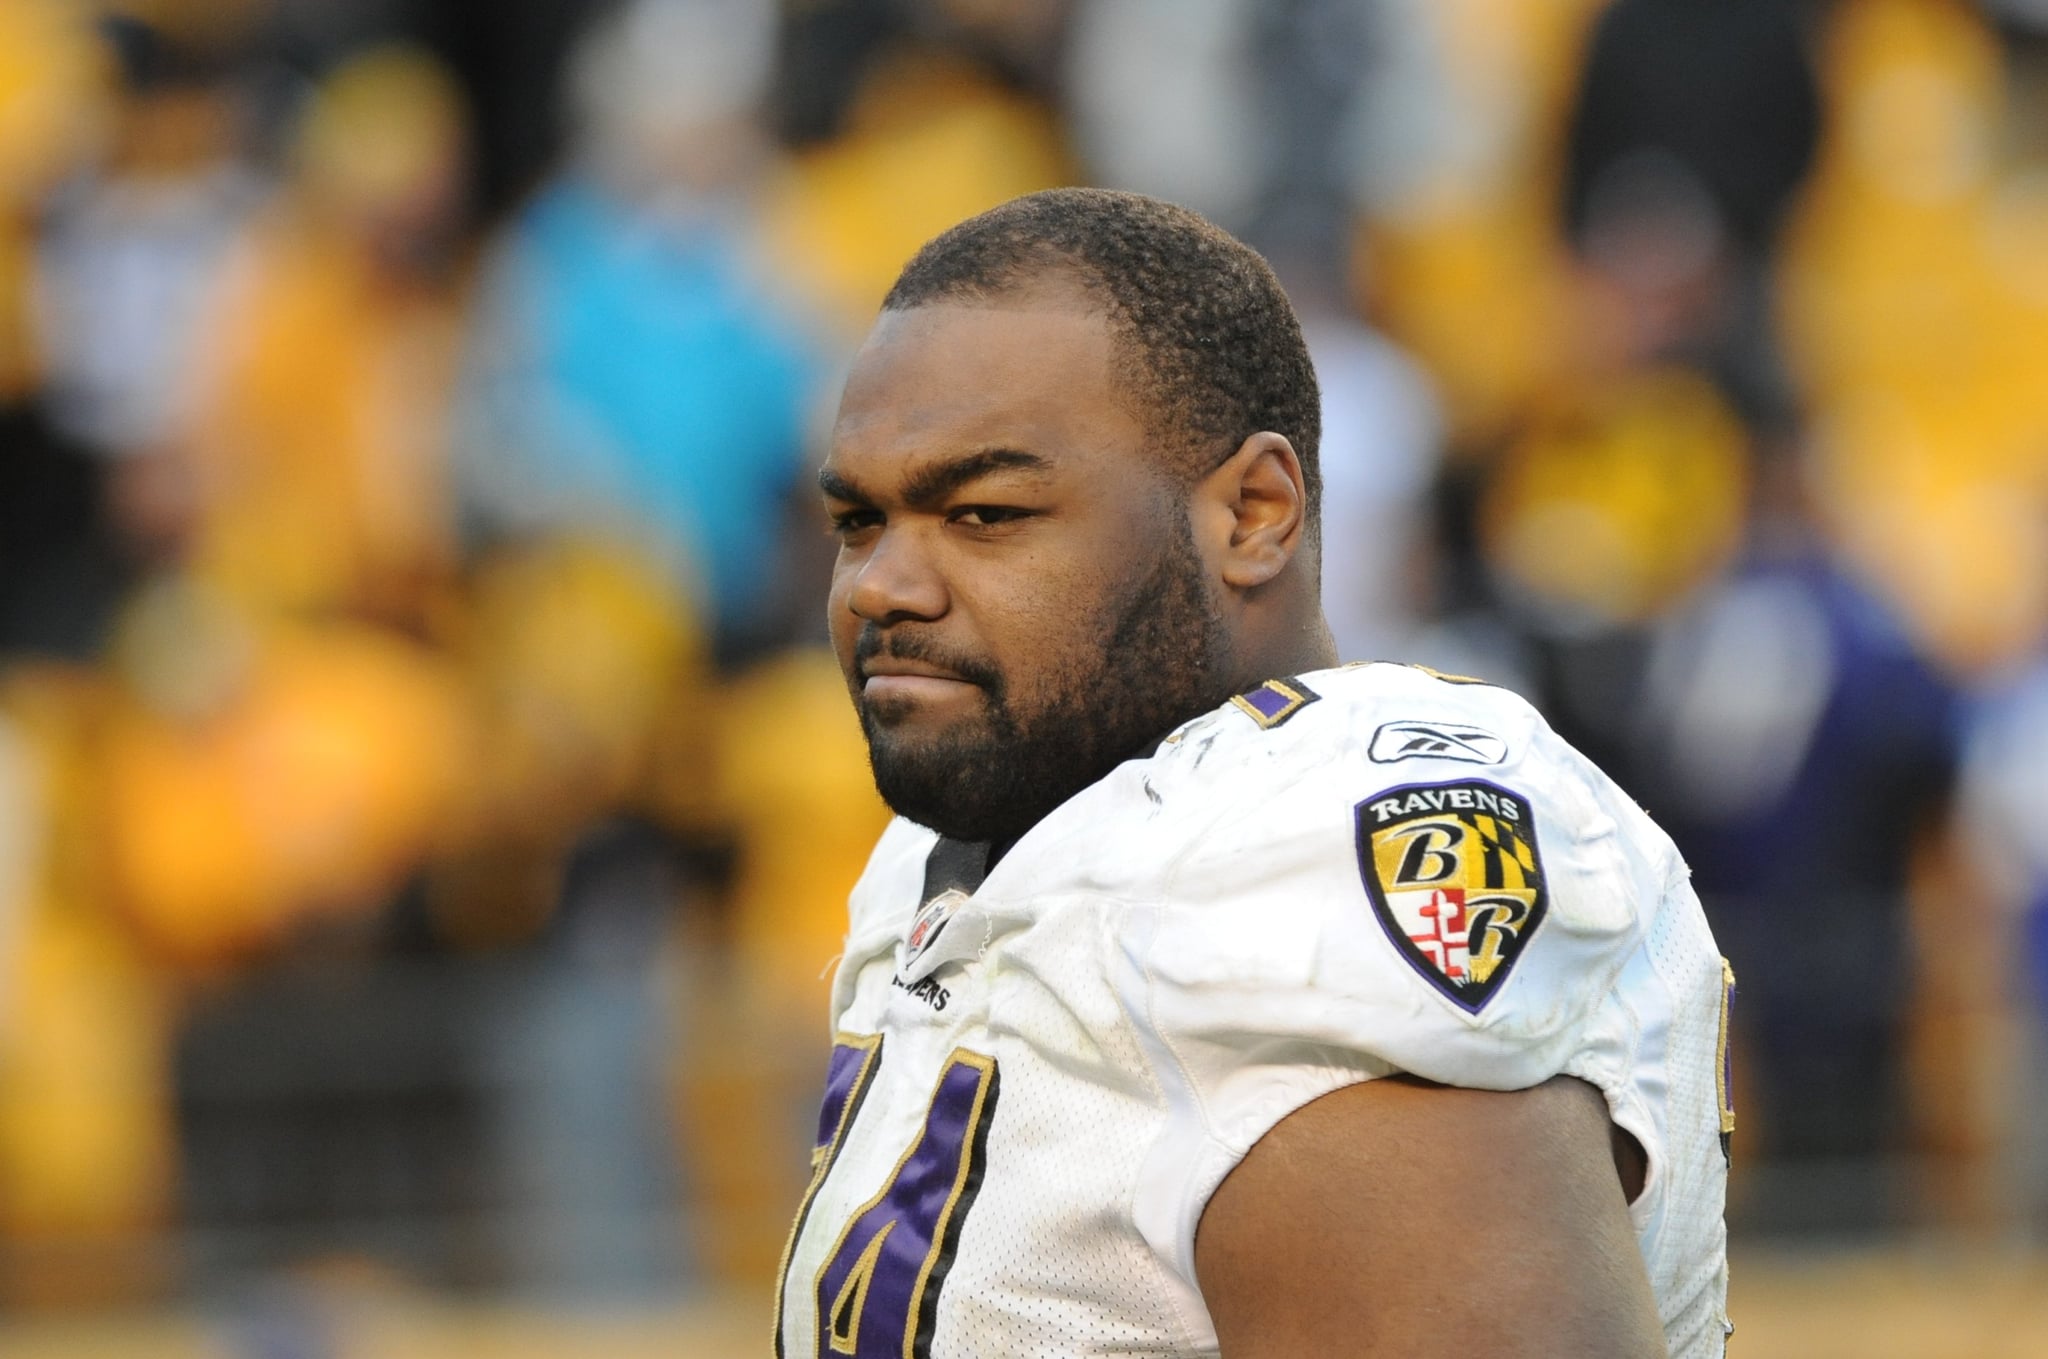 PITTSBURGH - DECEMBER 27:  Offencive lineman Michael Oher #74 of the Baltimore Ravens looks on from the field after a game against the Pittsburgh Steelers at Heinz Field on December 27, 2009 in Pittsburgh, Pennsylvania.  The Steelers defeated the Ravens 23-20.  (Photo by George Gojkovich/Getty Images)